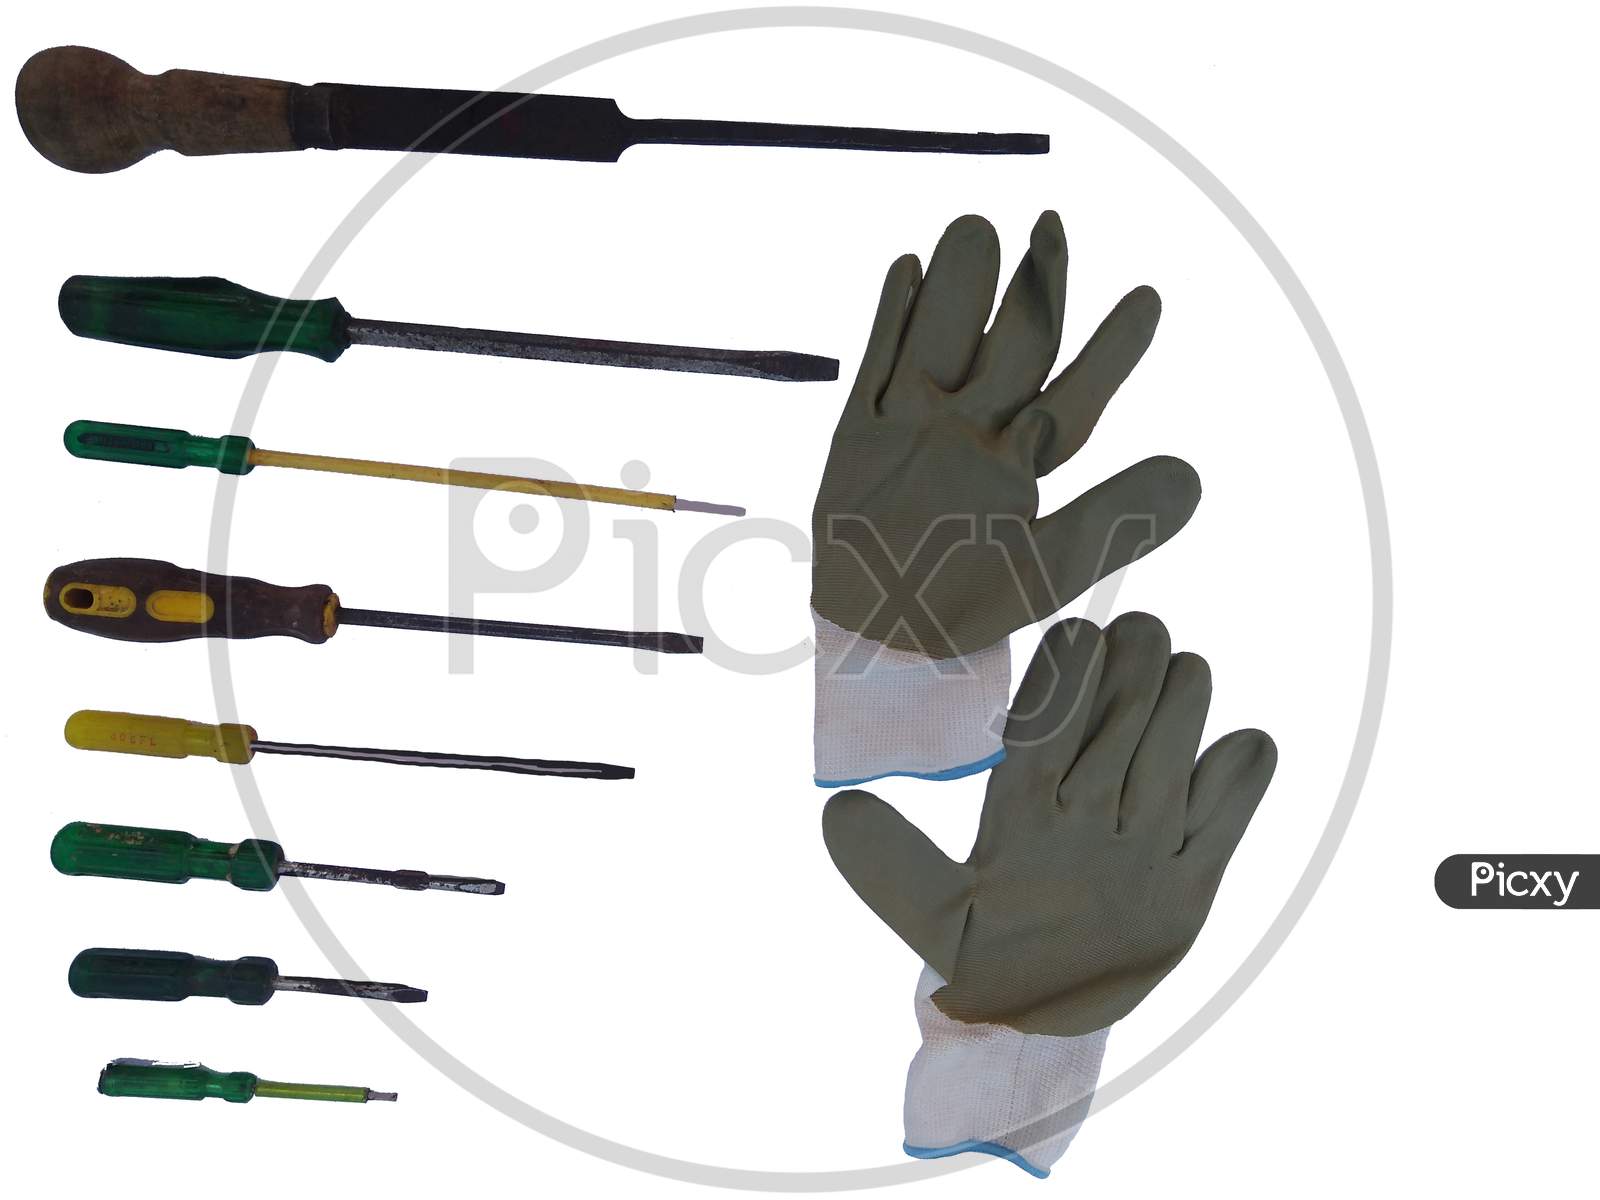 Protections Hand Gloves With Different Types Of Screwdrivers Isolated On White Background. Concept Is Safety First.